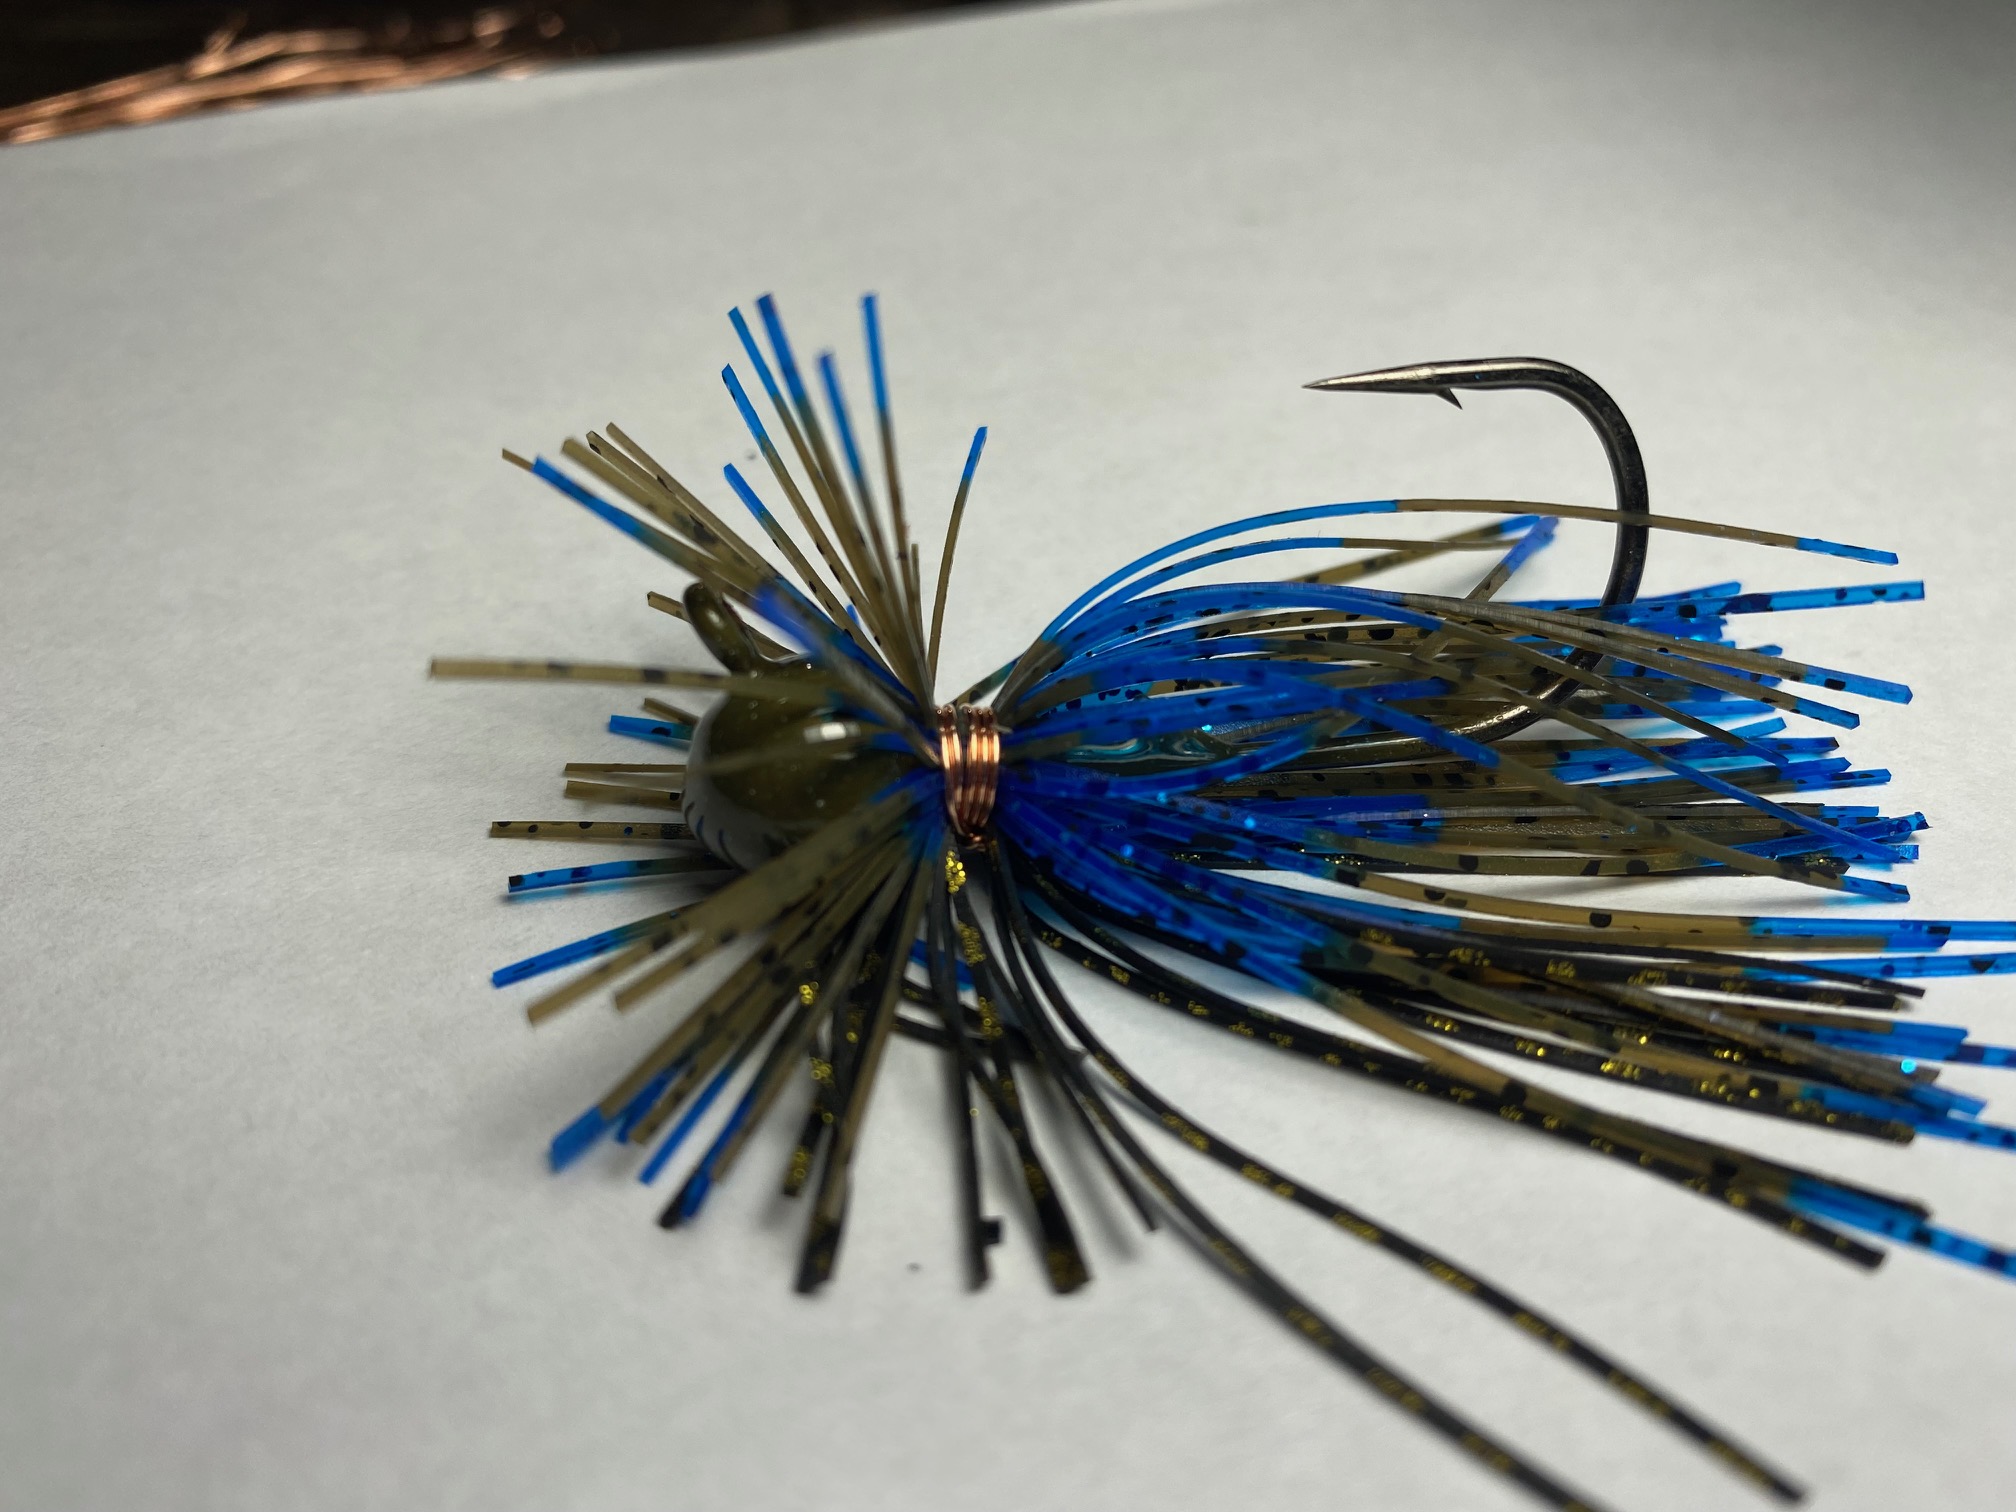 Finesse Jig – Adrenaline Tackle Company 217-502-6880